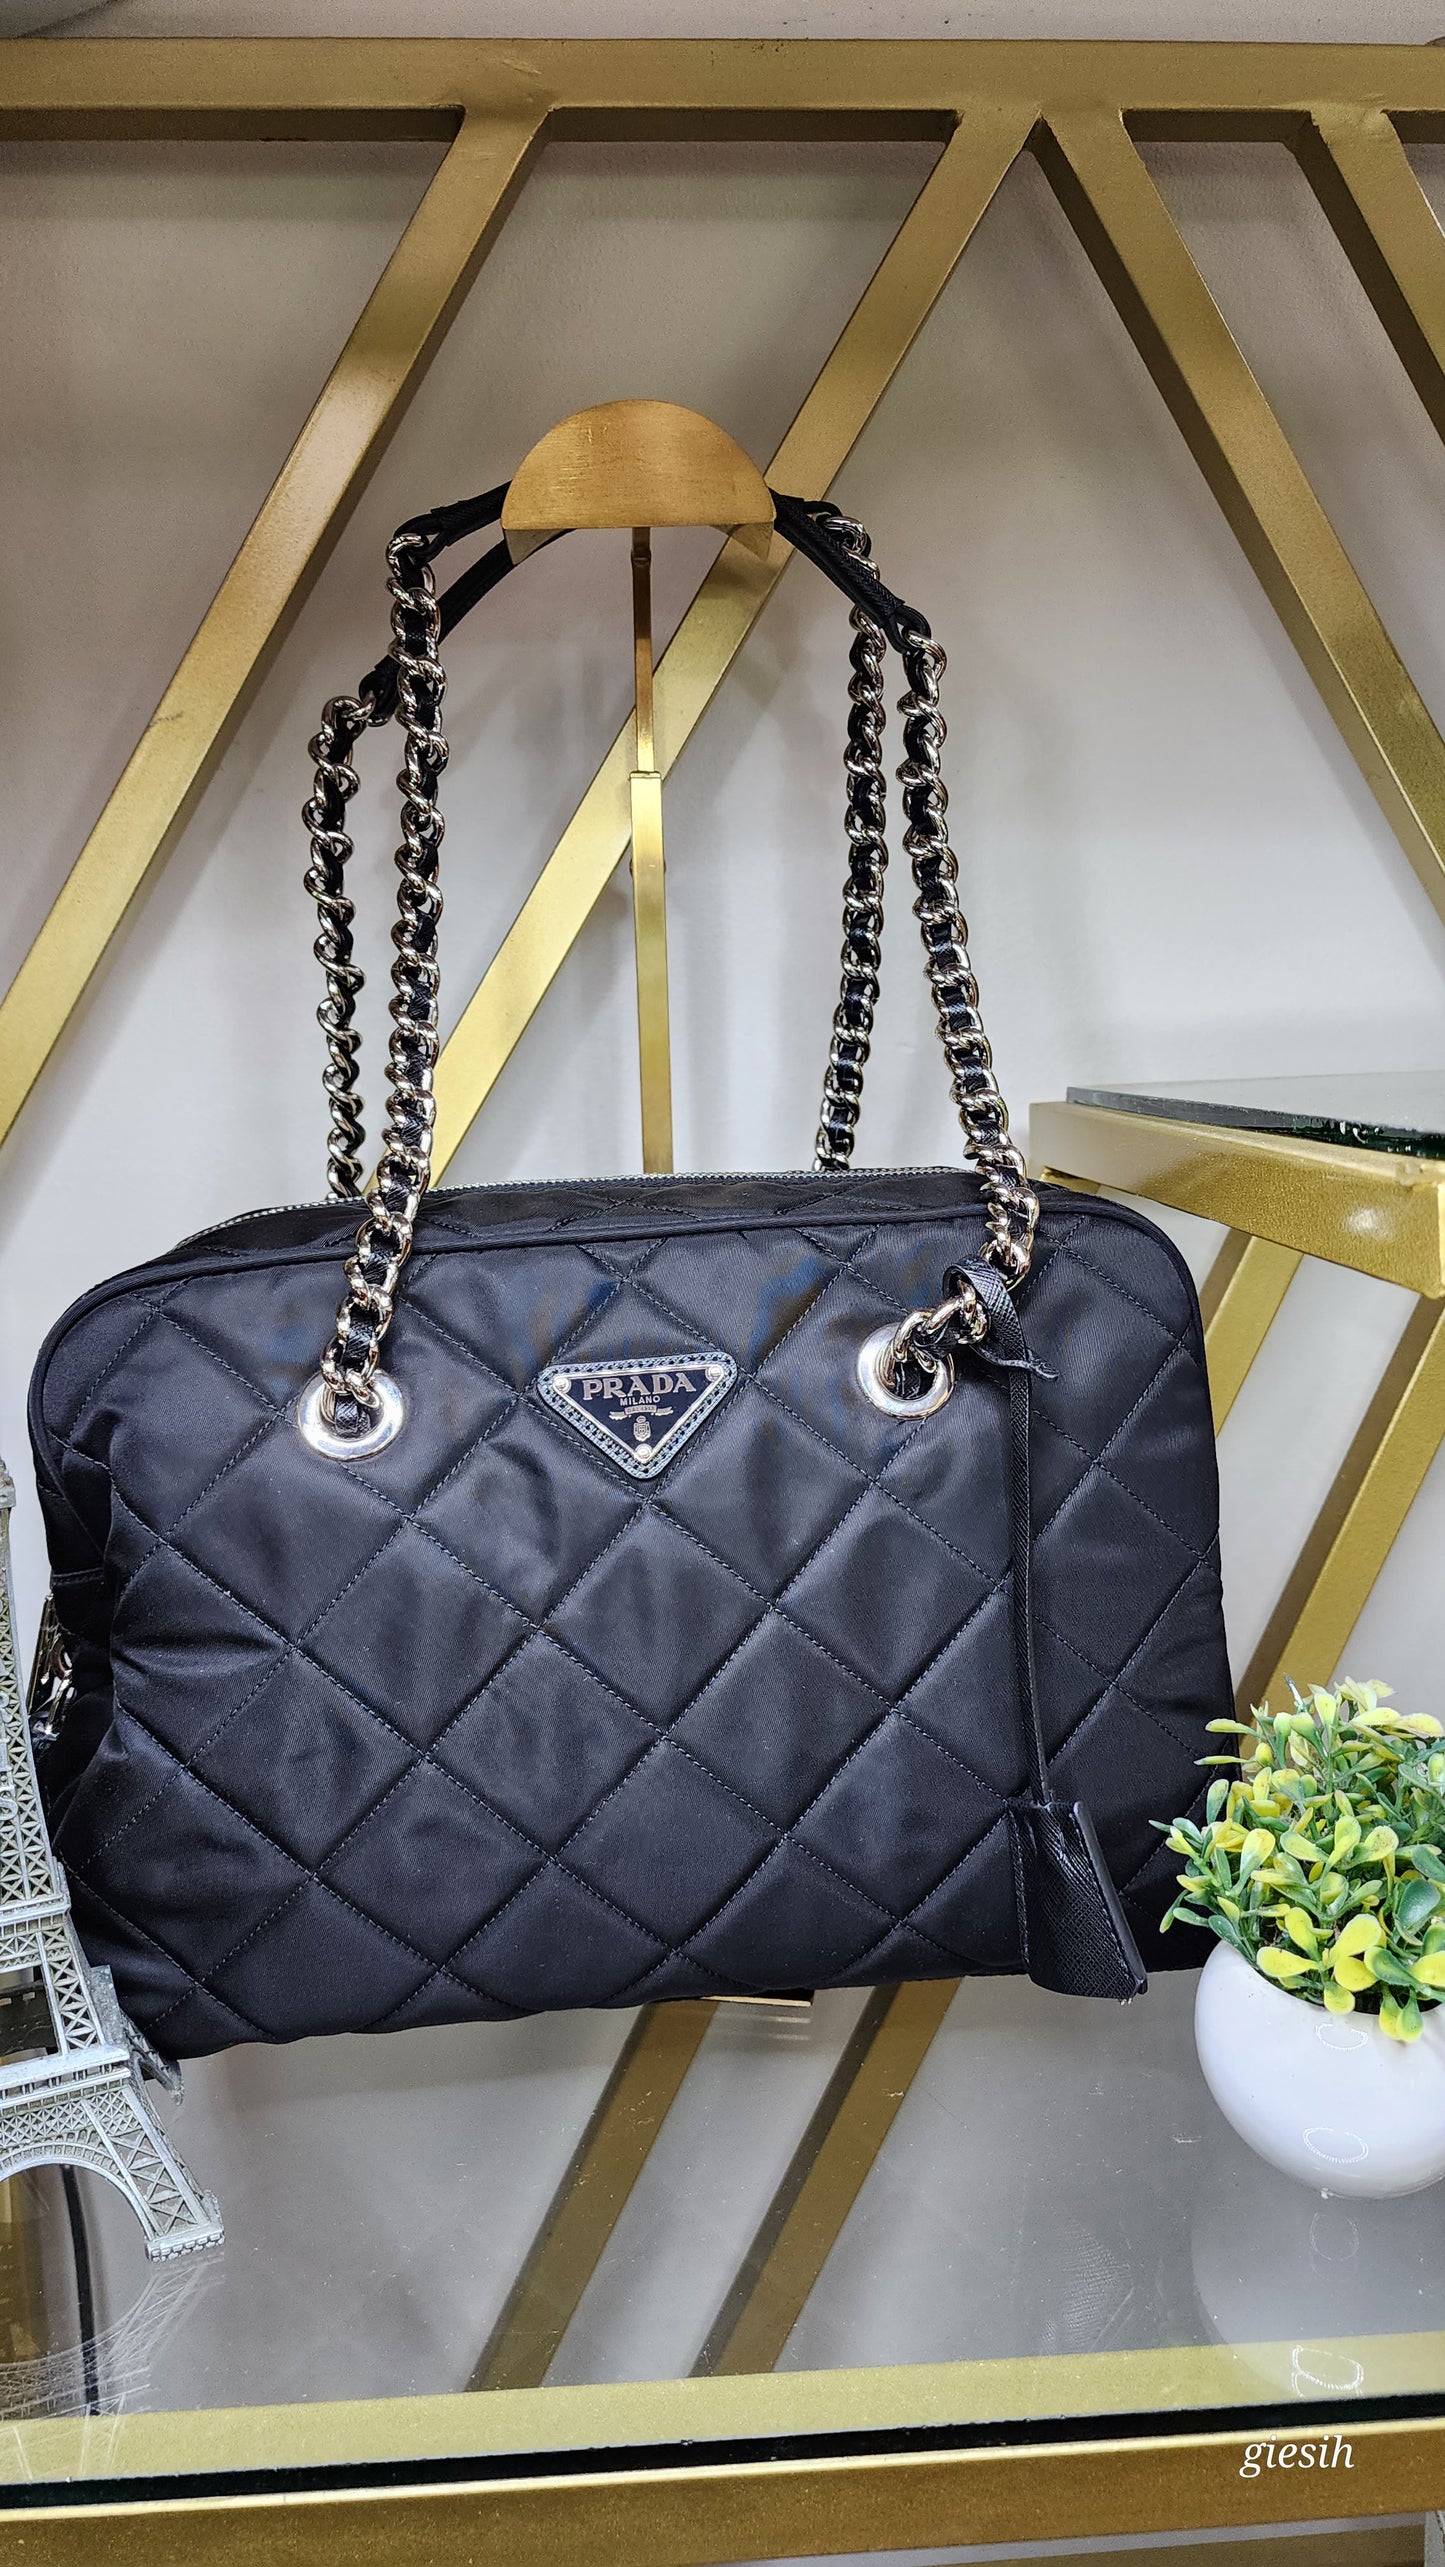 Prada 1bb903 quilted